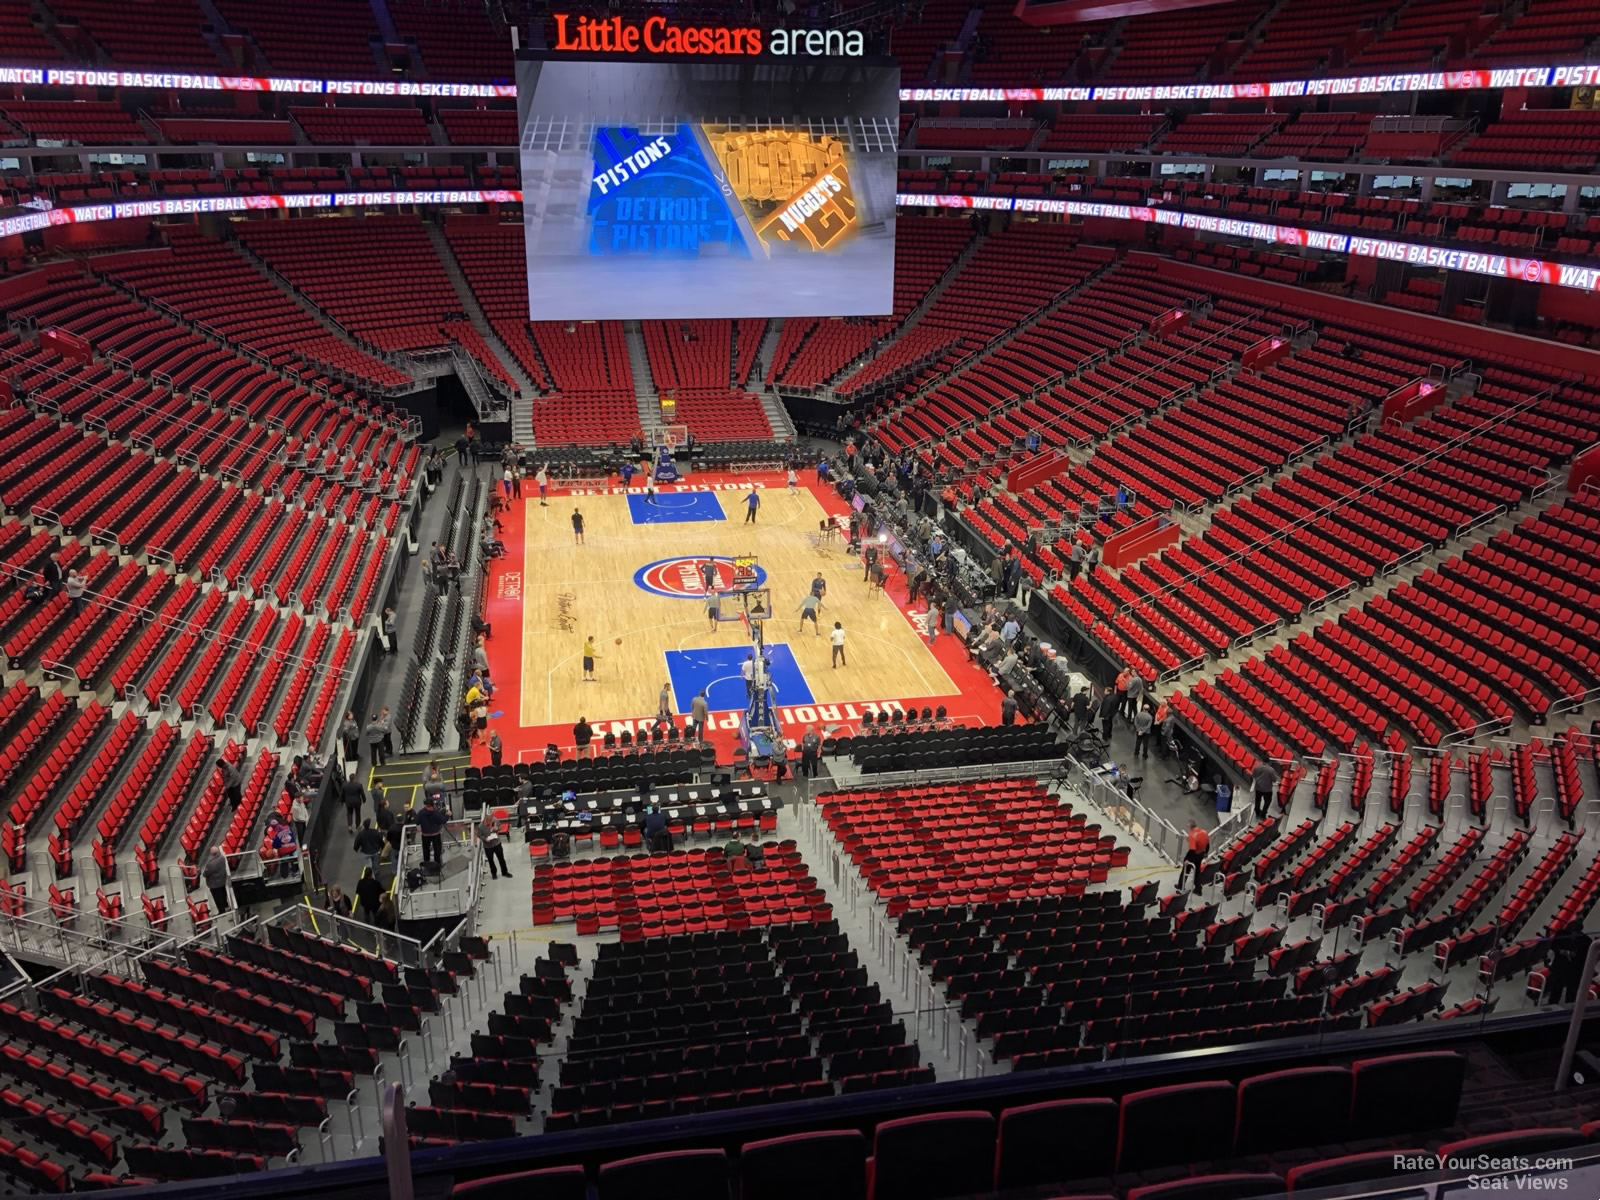 mezzanine 3, row 2 seat view  for basketball - little caesars arena